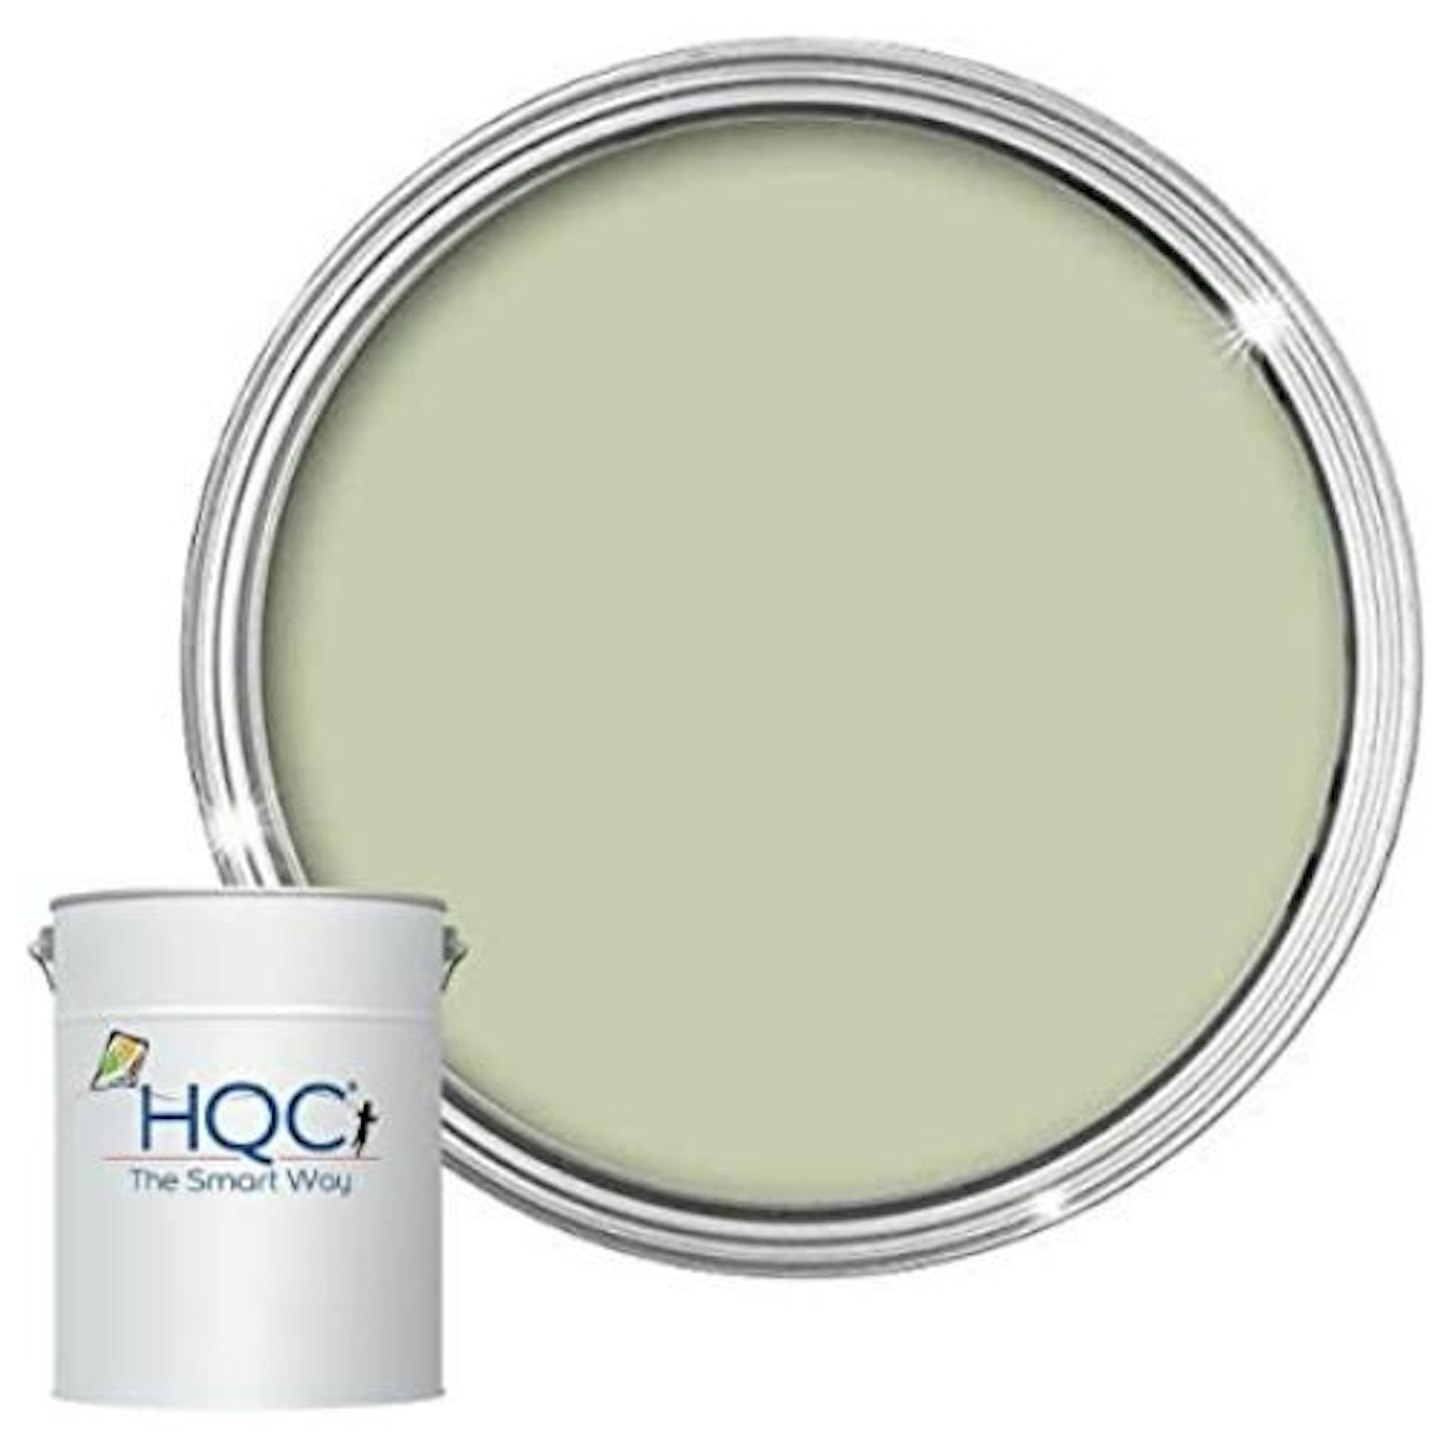 HQC Fence and Garden Shed Paint